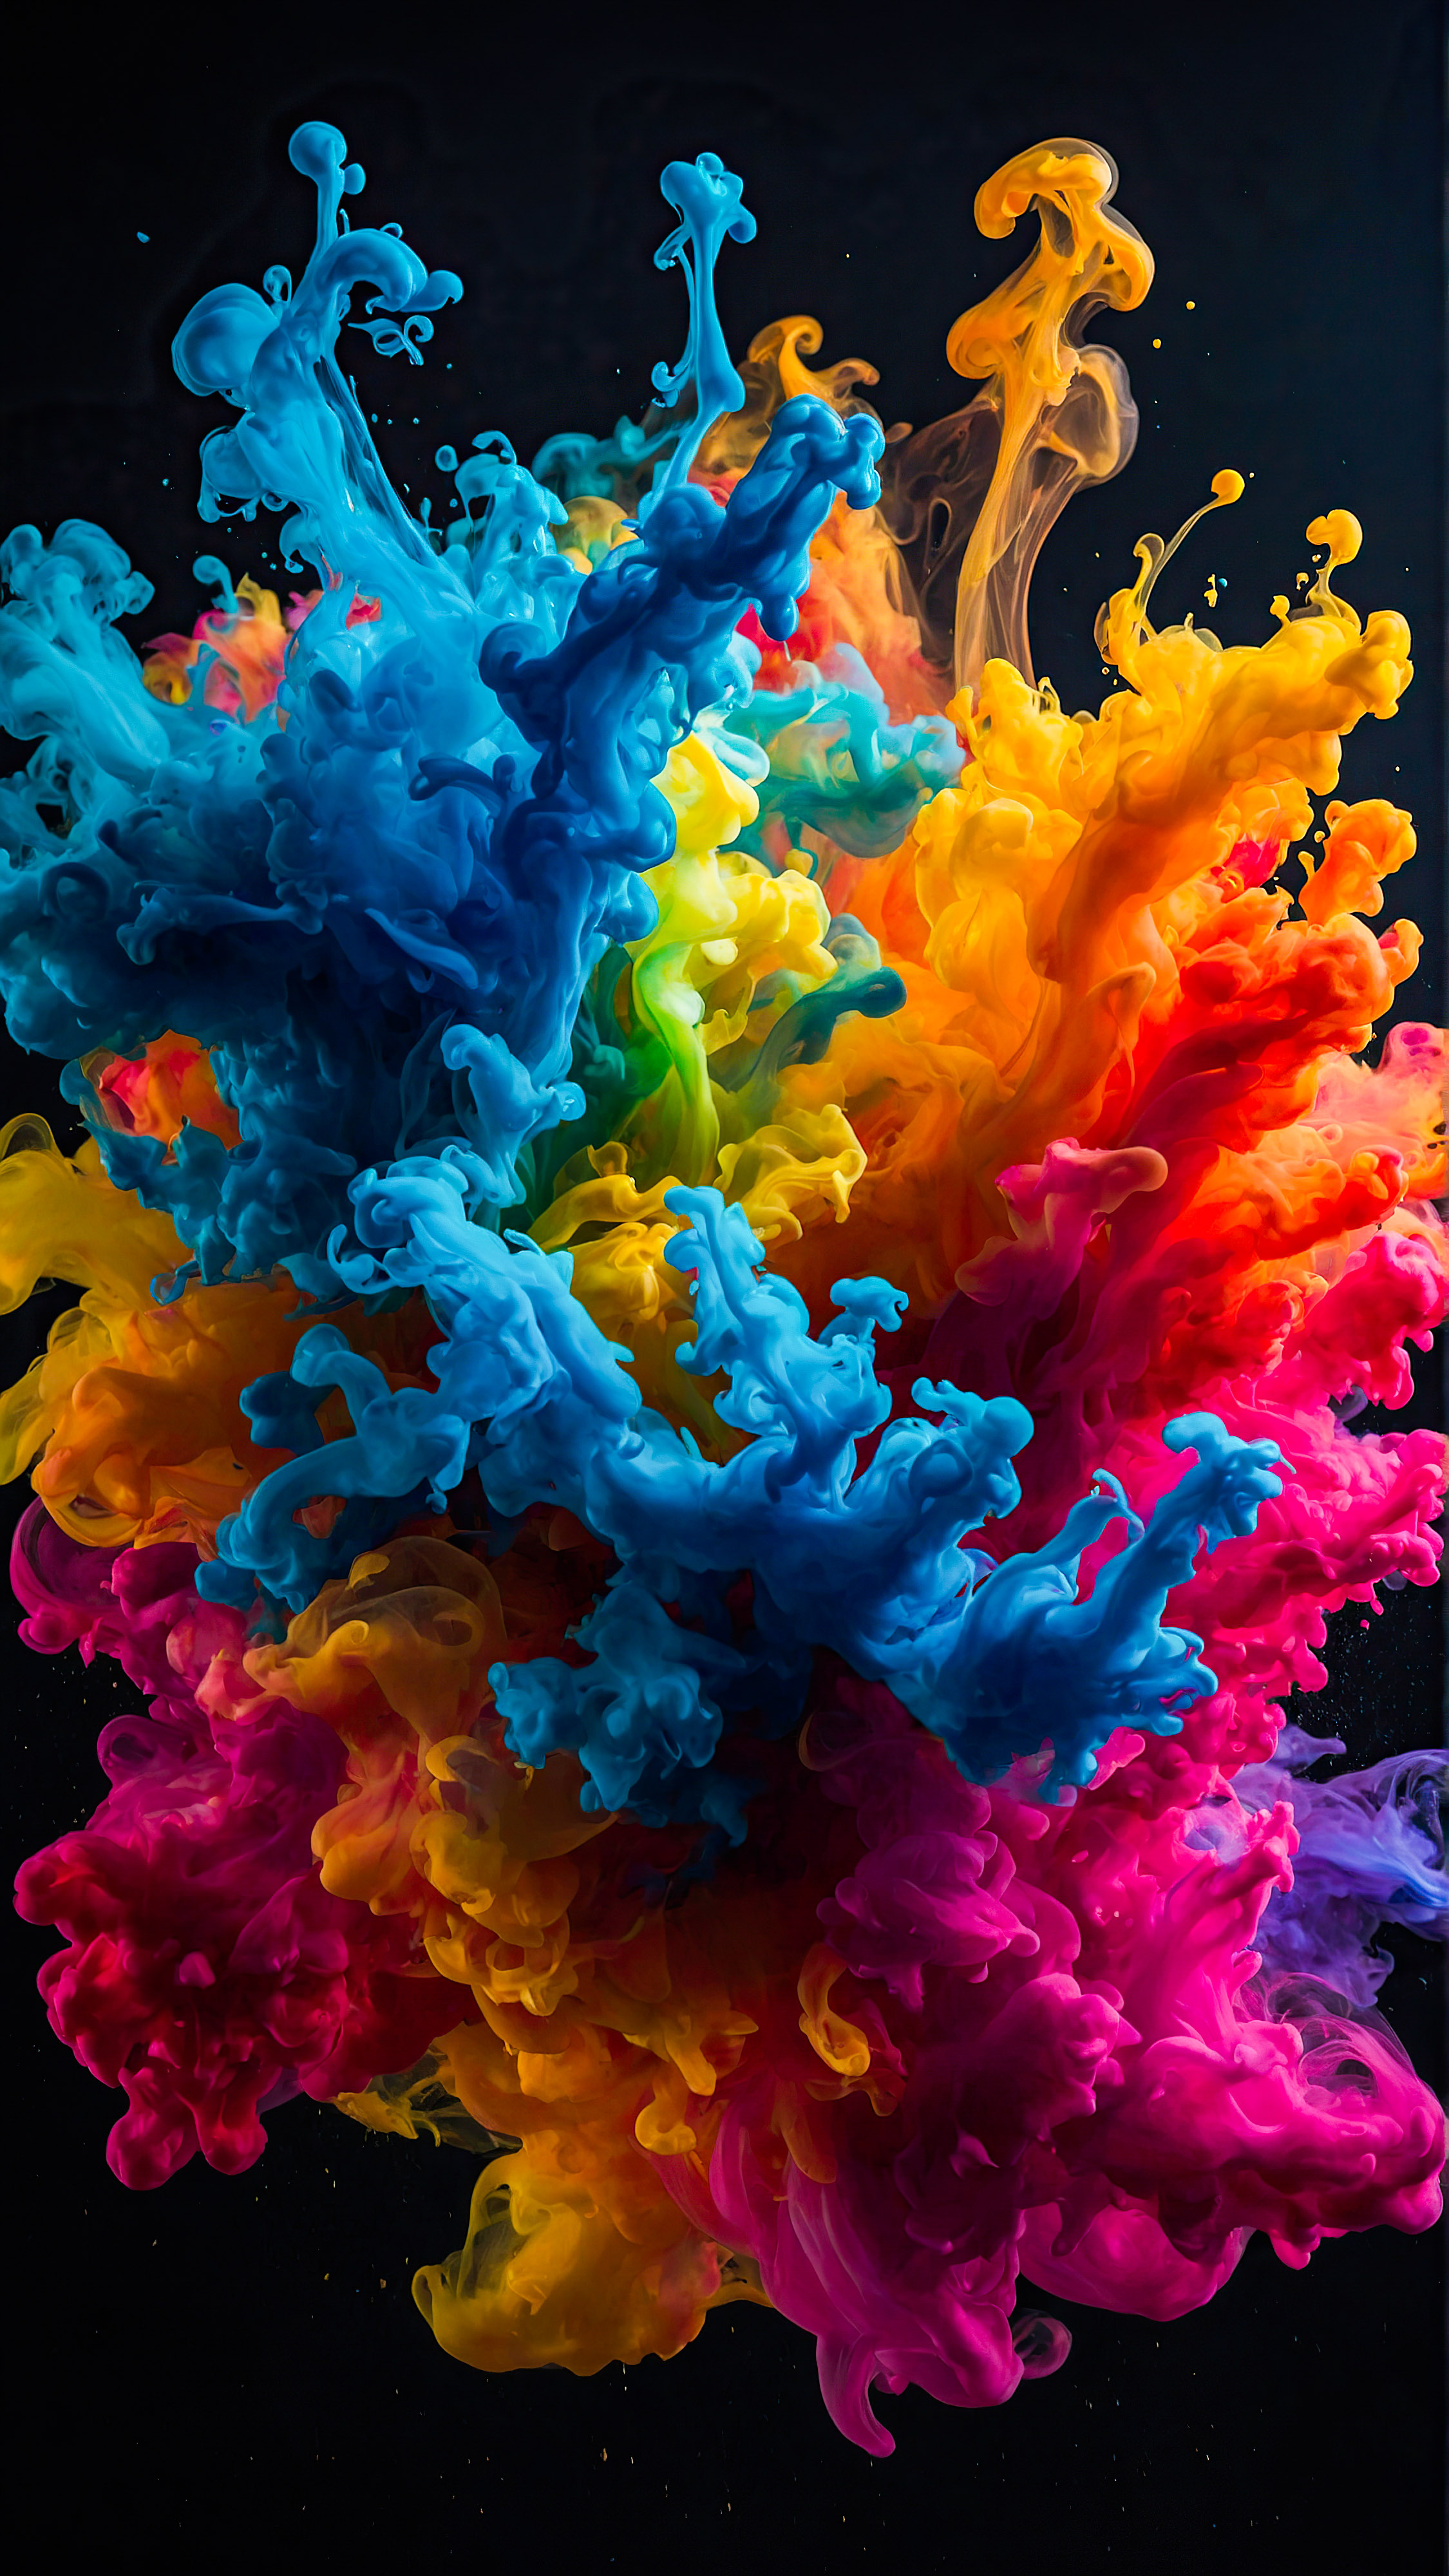 Get lost in the magic of our cool 4K iPhone wallpapers, featuring vibrant, multicolored ink plumes dispersing in water, creating an abstract and visually striking effect that adds a splash of creativity to your screen.